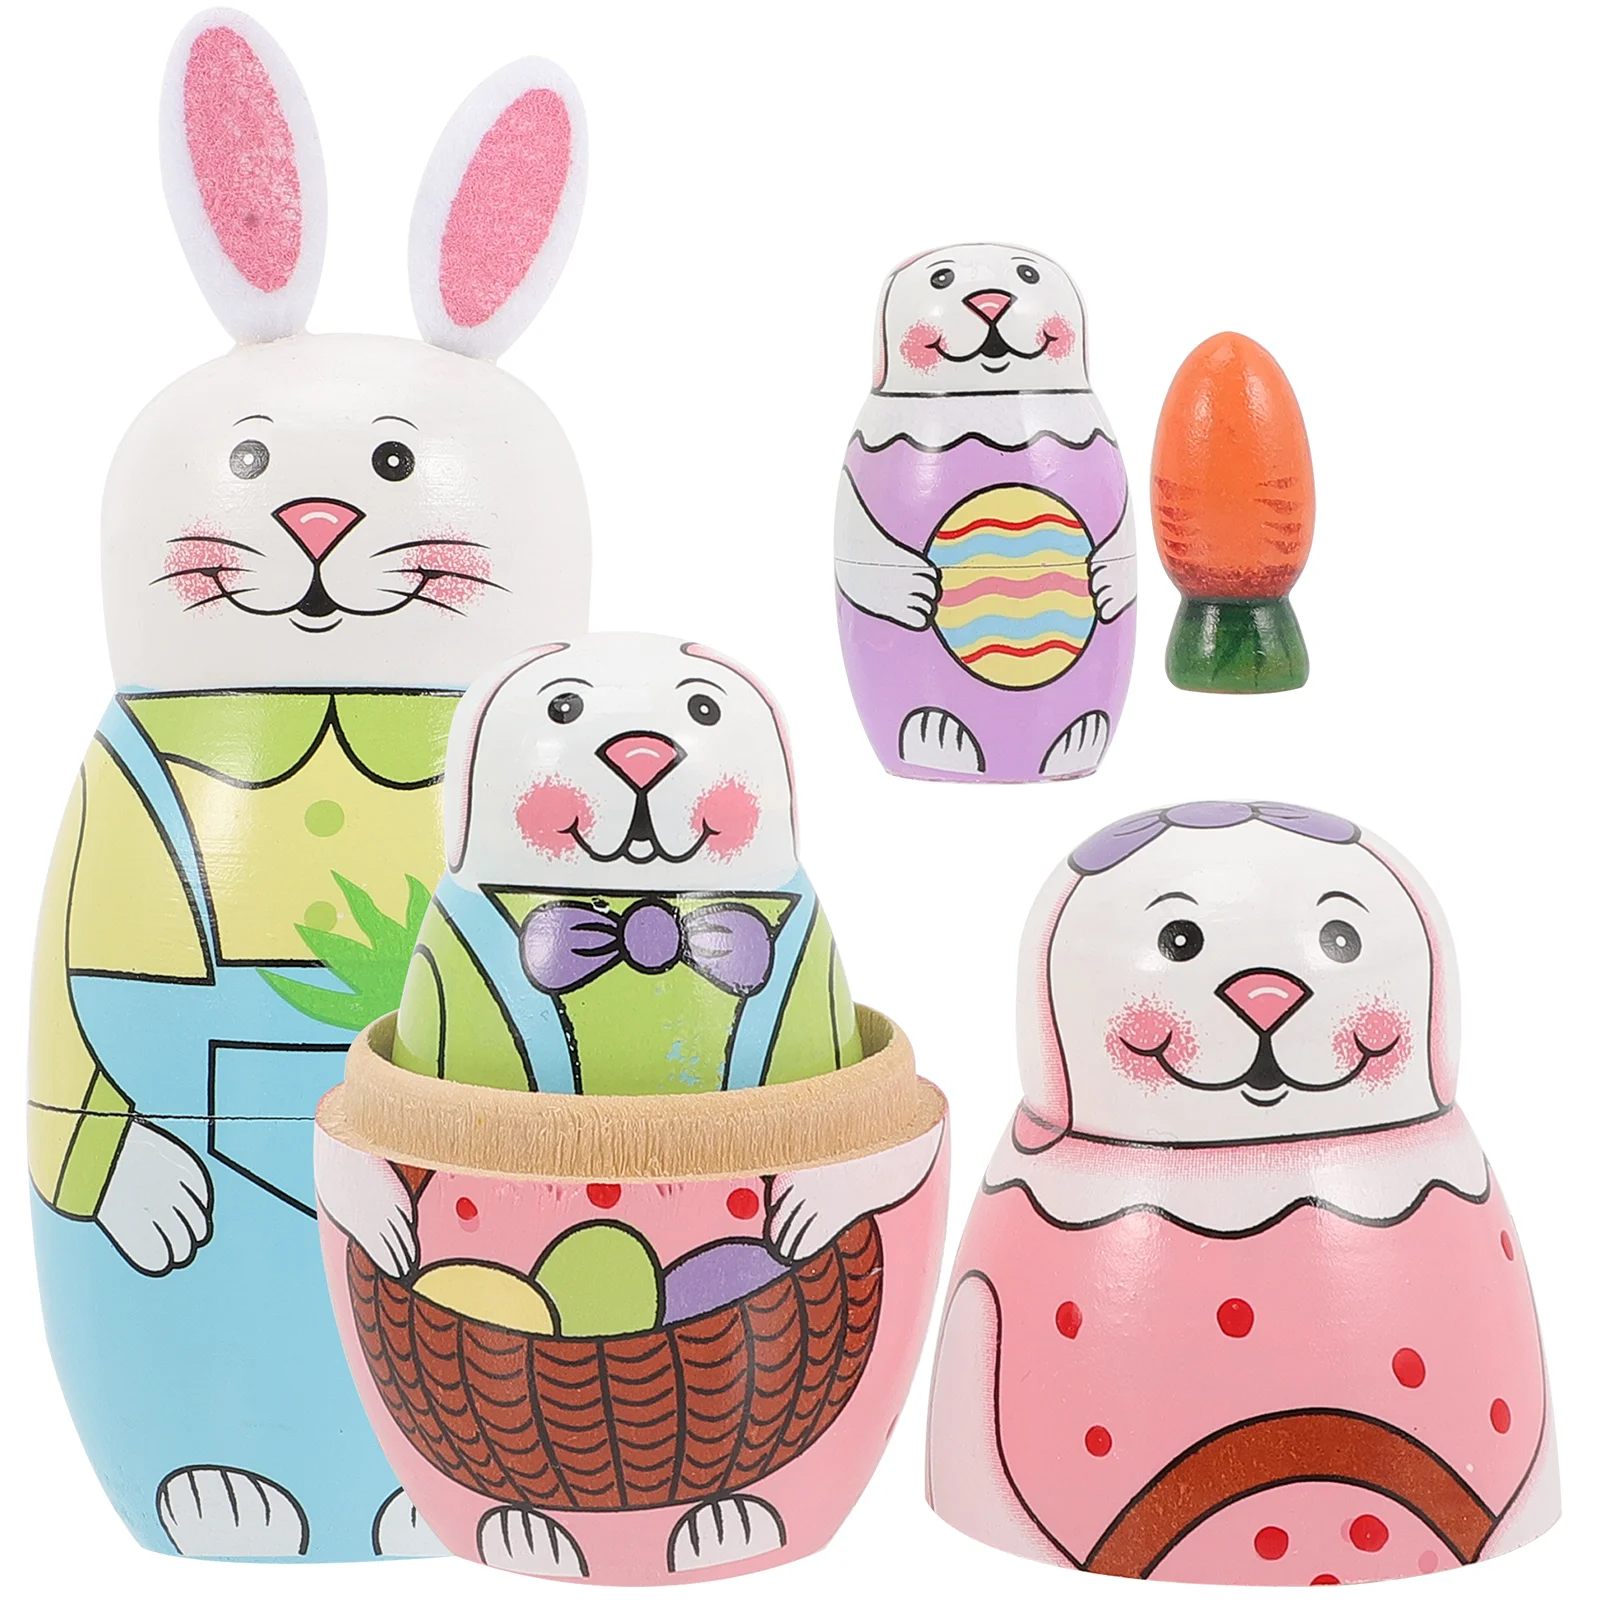 

Handmade Wooden Russian Nesting Animals - Creative Five-Layered Traditional Toy for Kids Christmas Gift